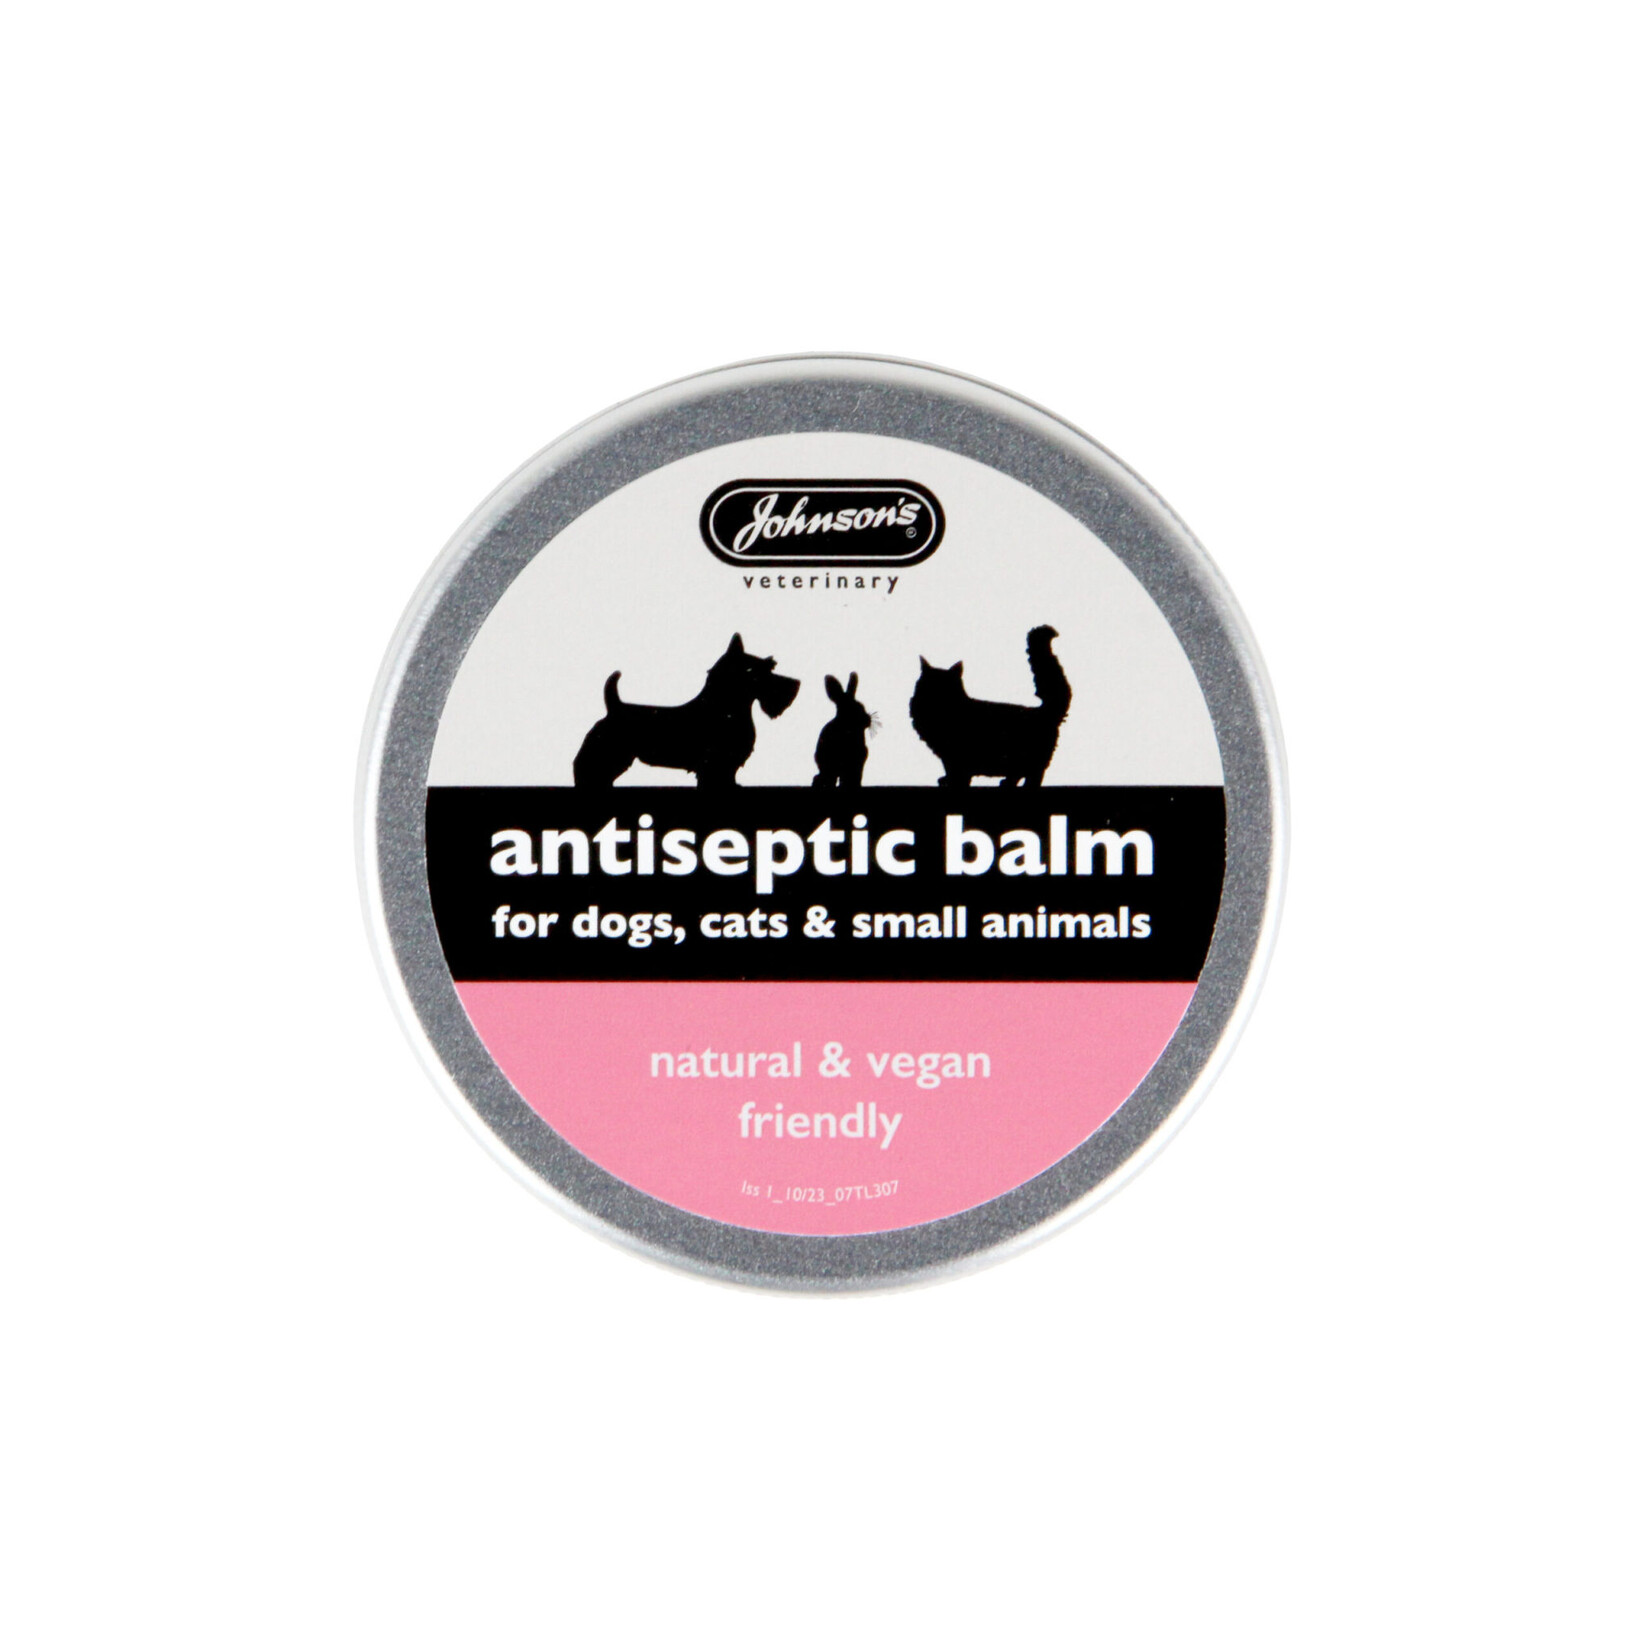 Johnson's Veterinary Antiseptic Natural Balm for Dogs, Cats and Small Animals, 45g